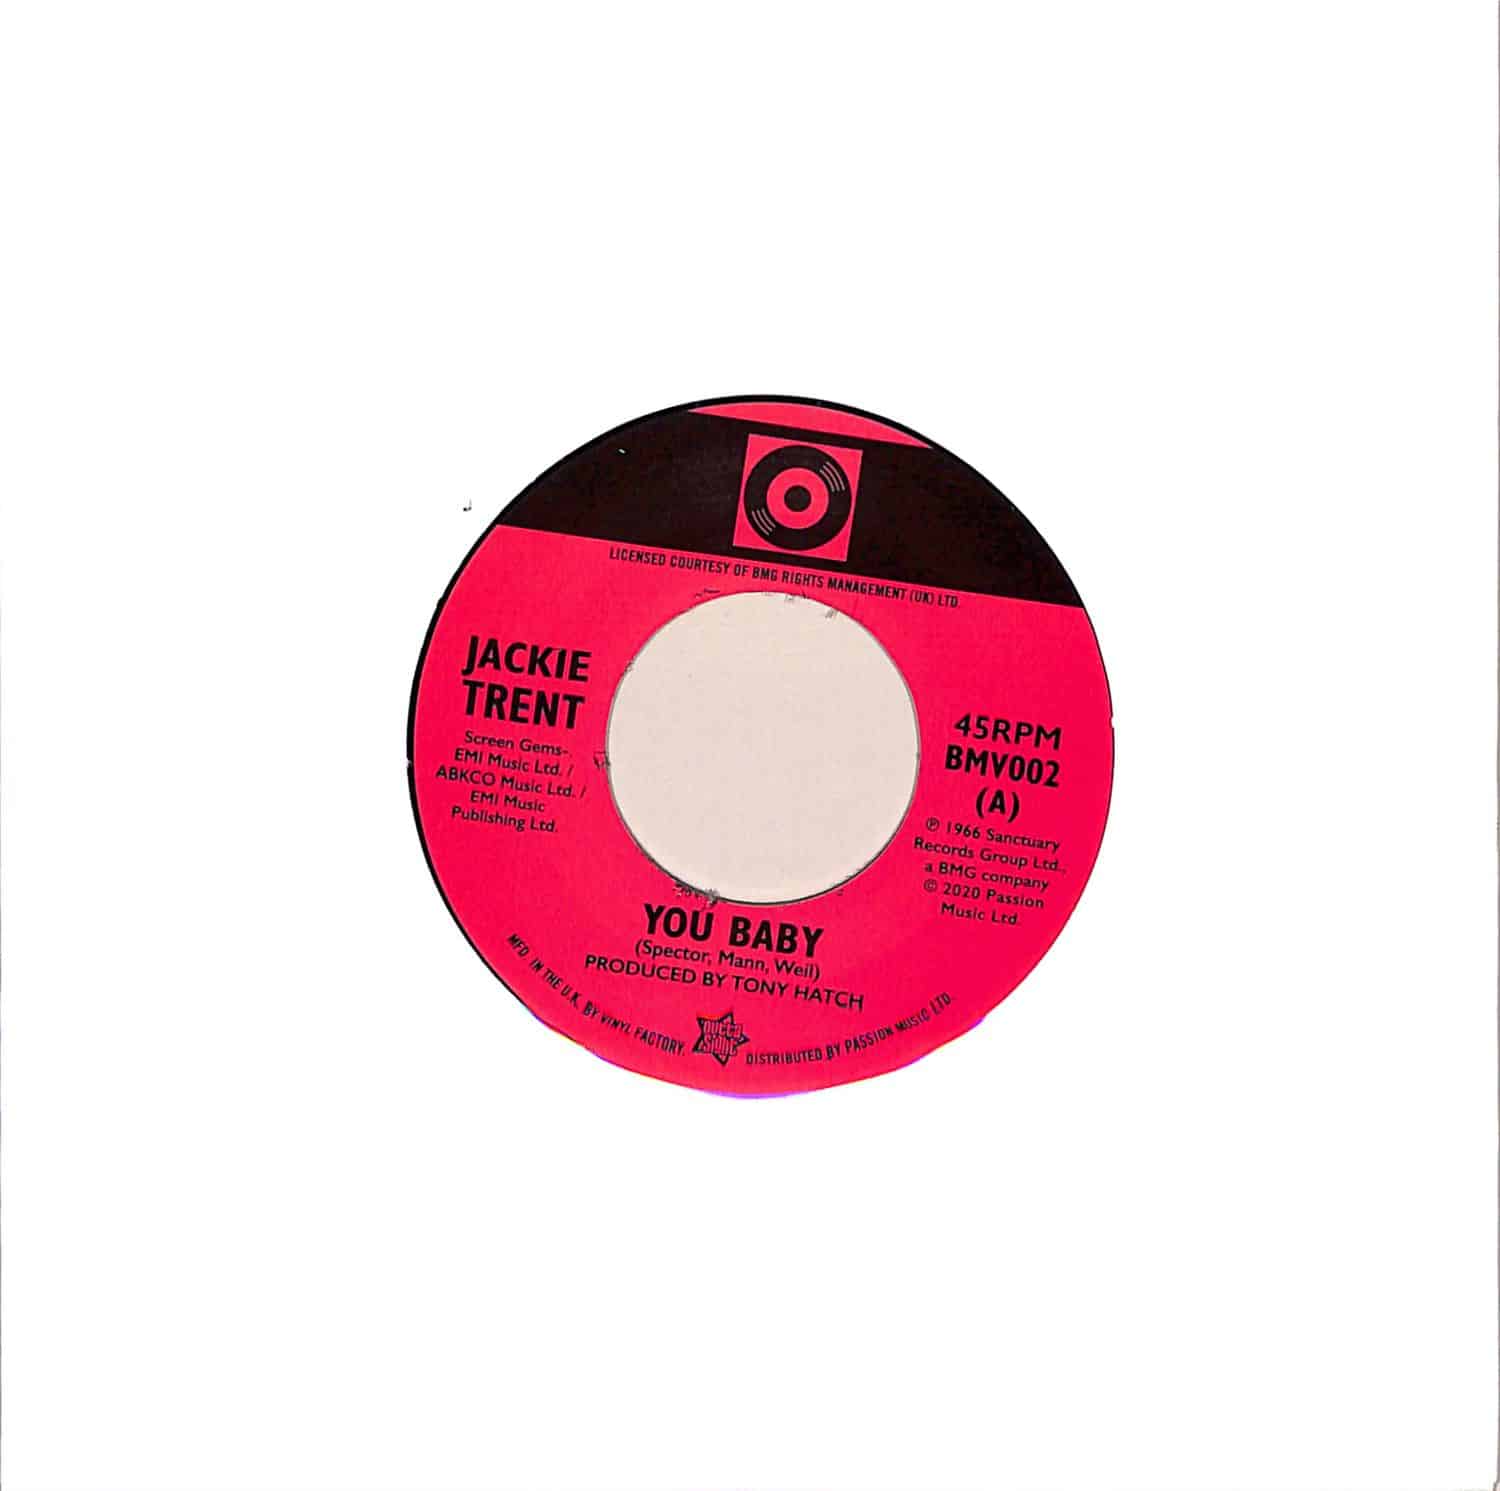 Jackie Trent / Lorriane Silver - YOU BABY / LOST SUMMER LOVE 